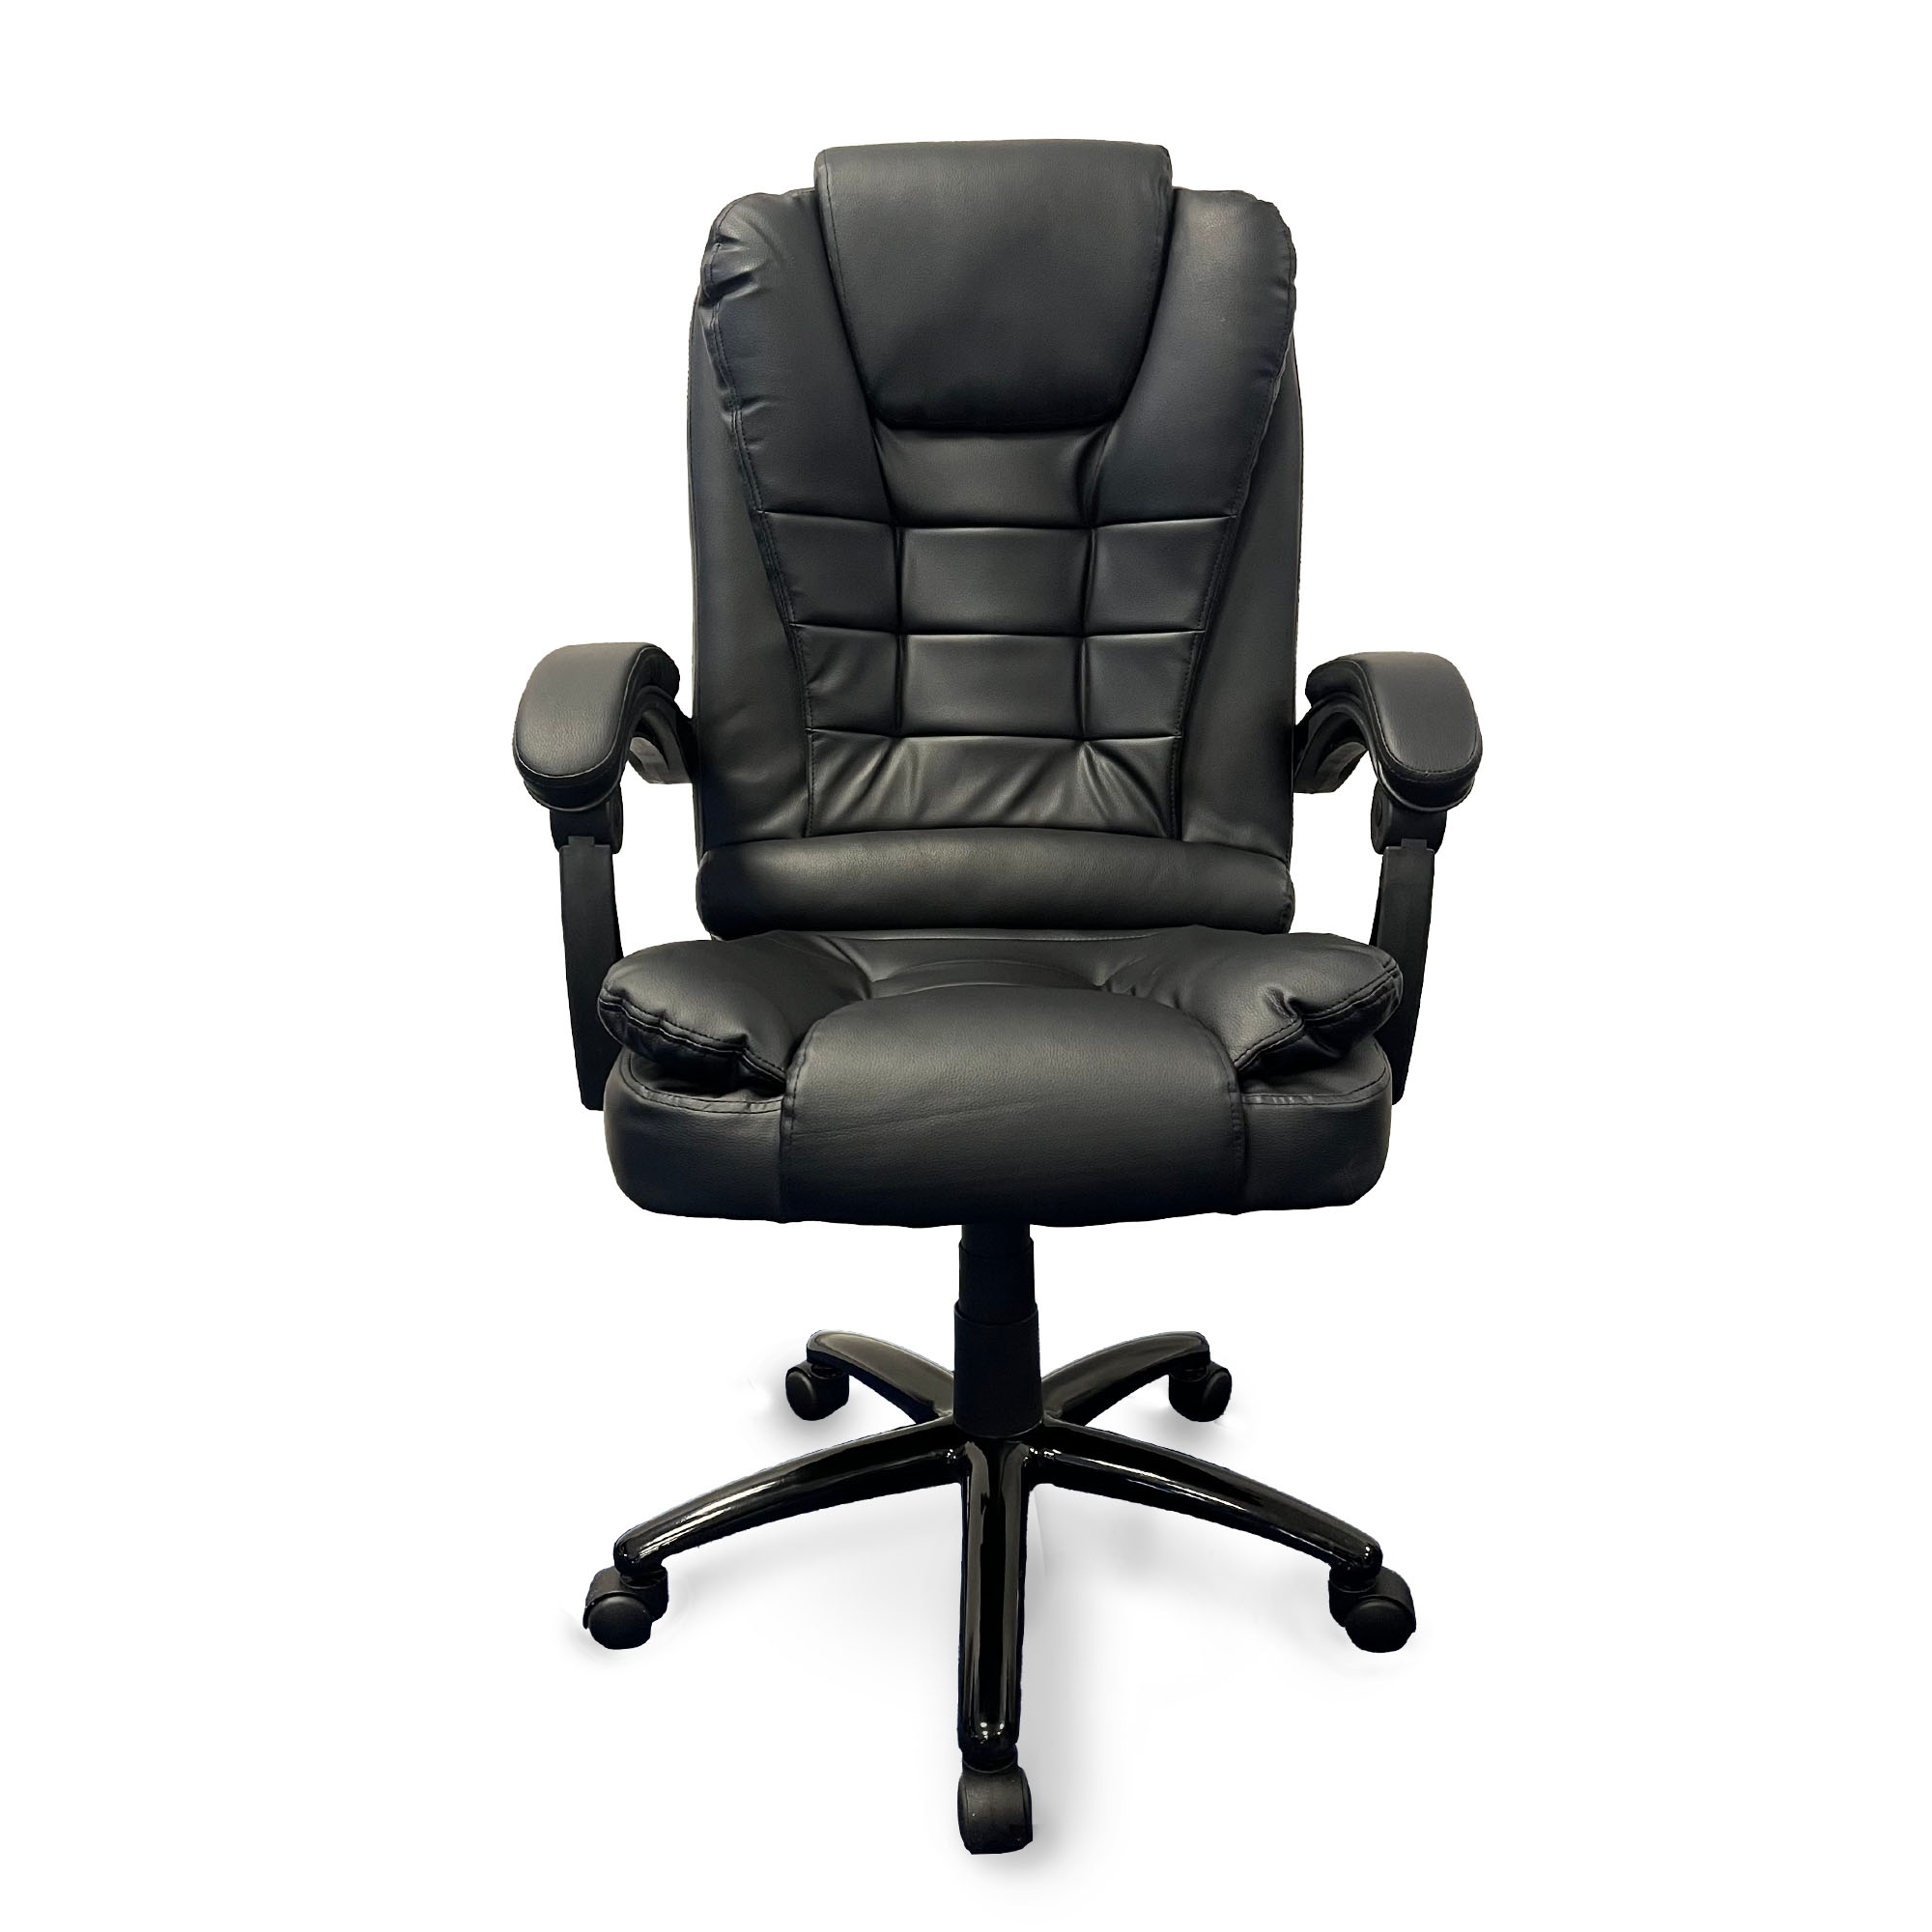 Ergodu Luxury Office Chair with Adjustable Backrest front view